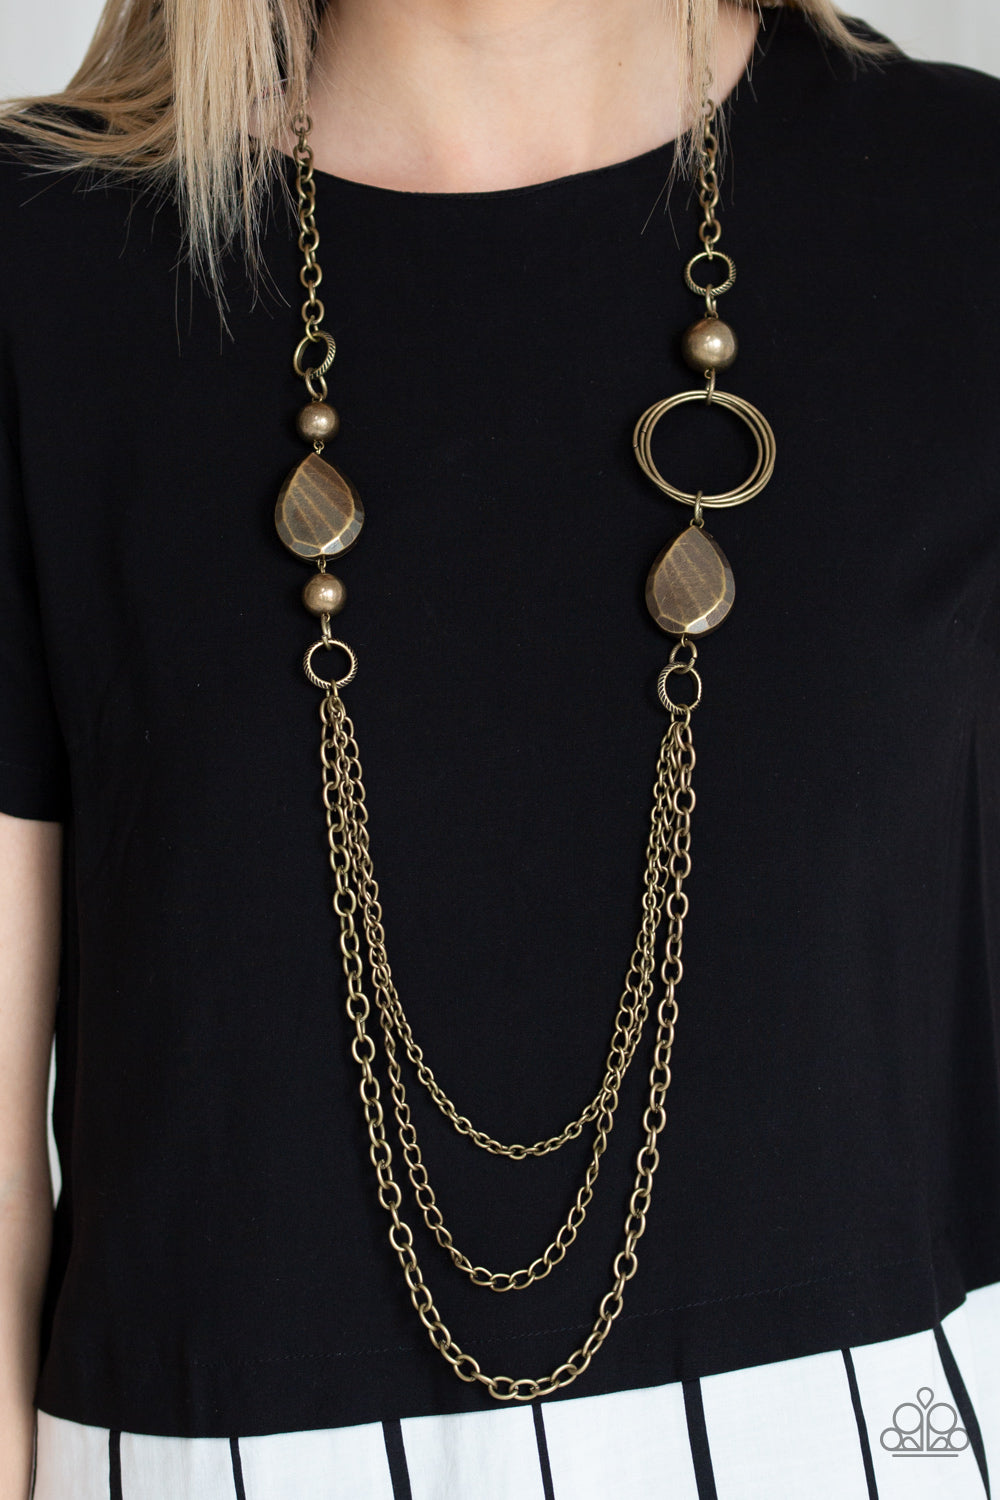 Paparazzi Accessories - Rebels Have More Fun - Brass Necklace